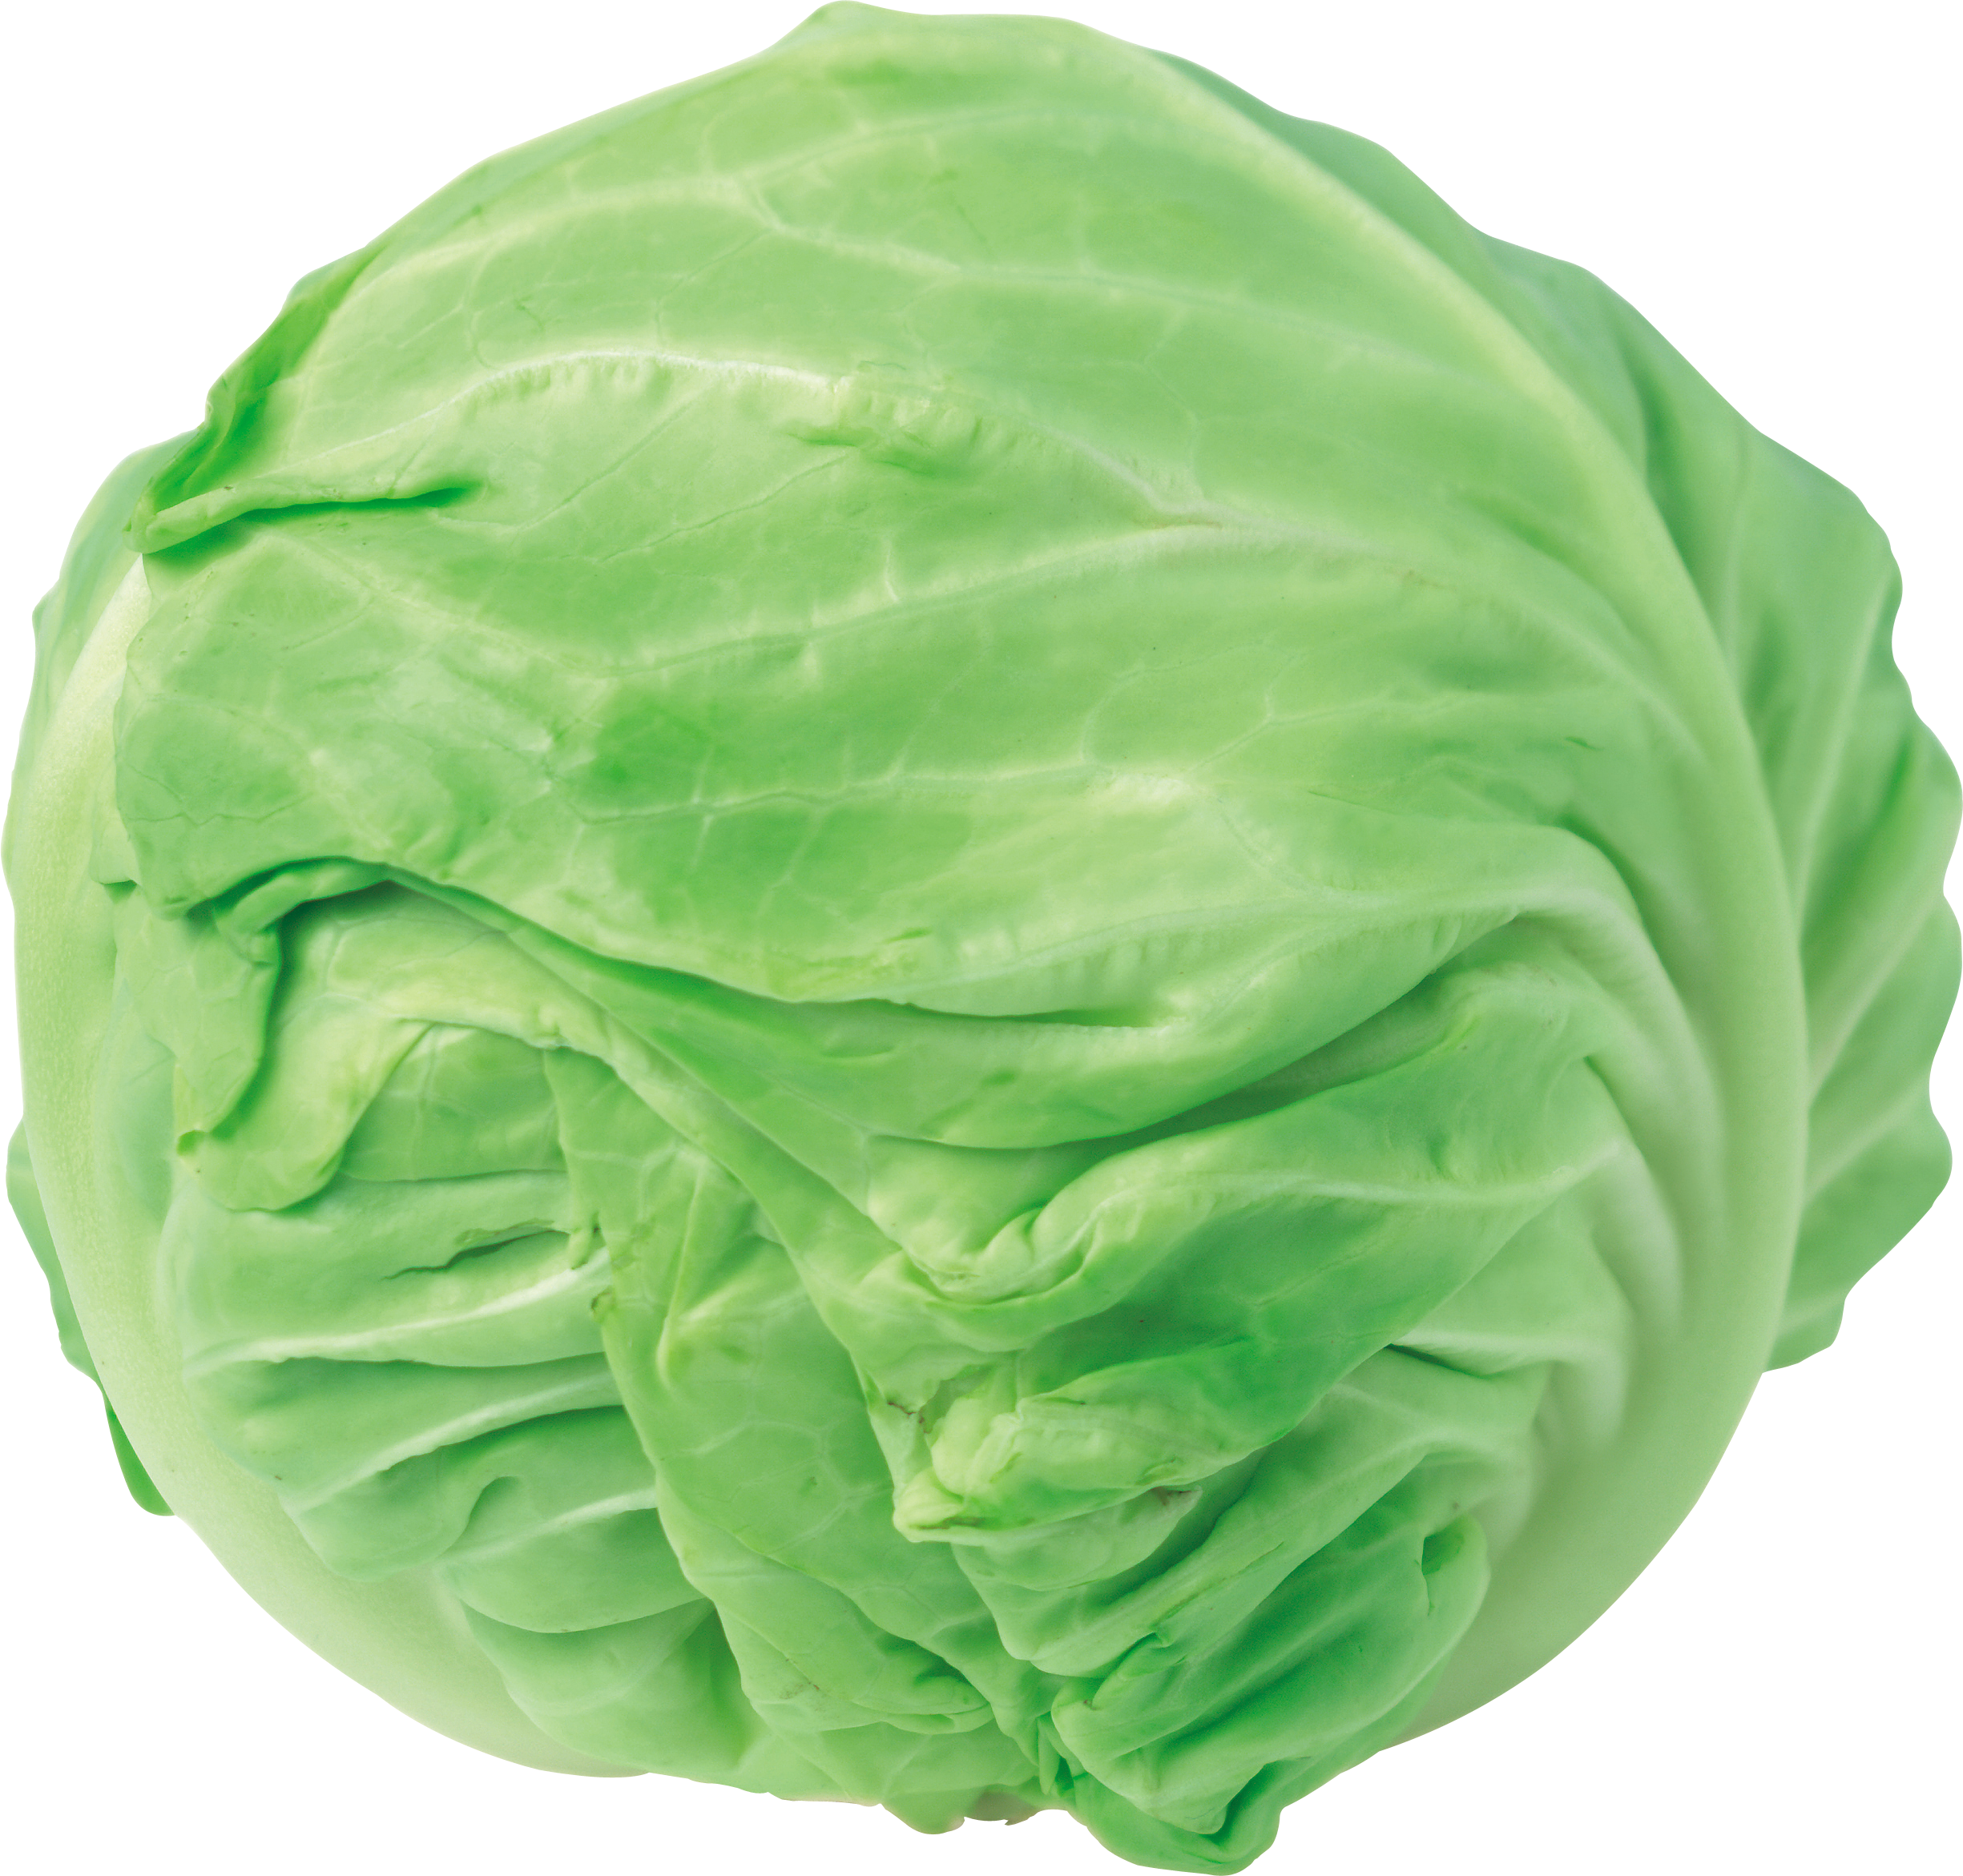 Png image free download. Clipart vegetables cabbage